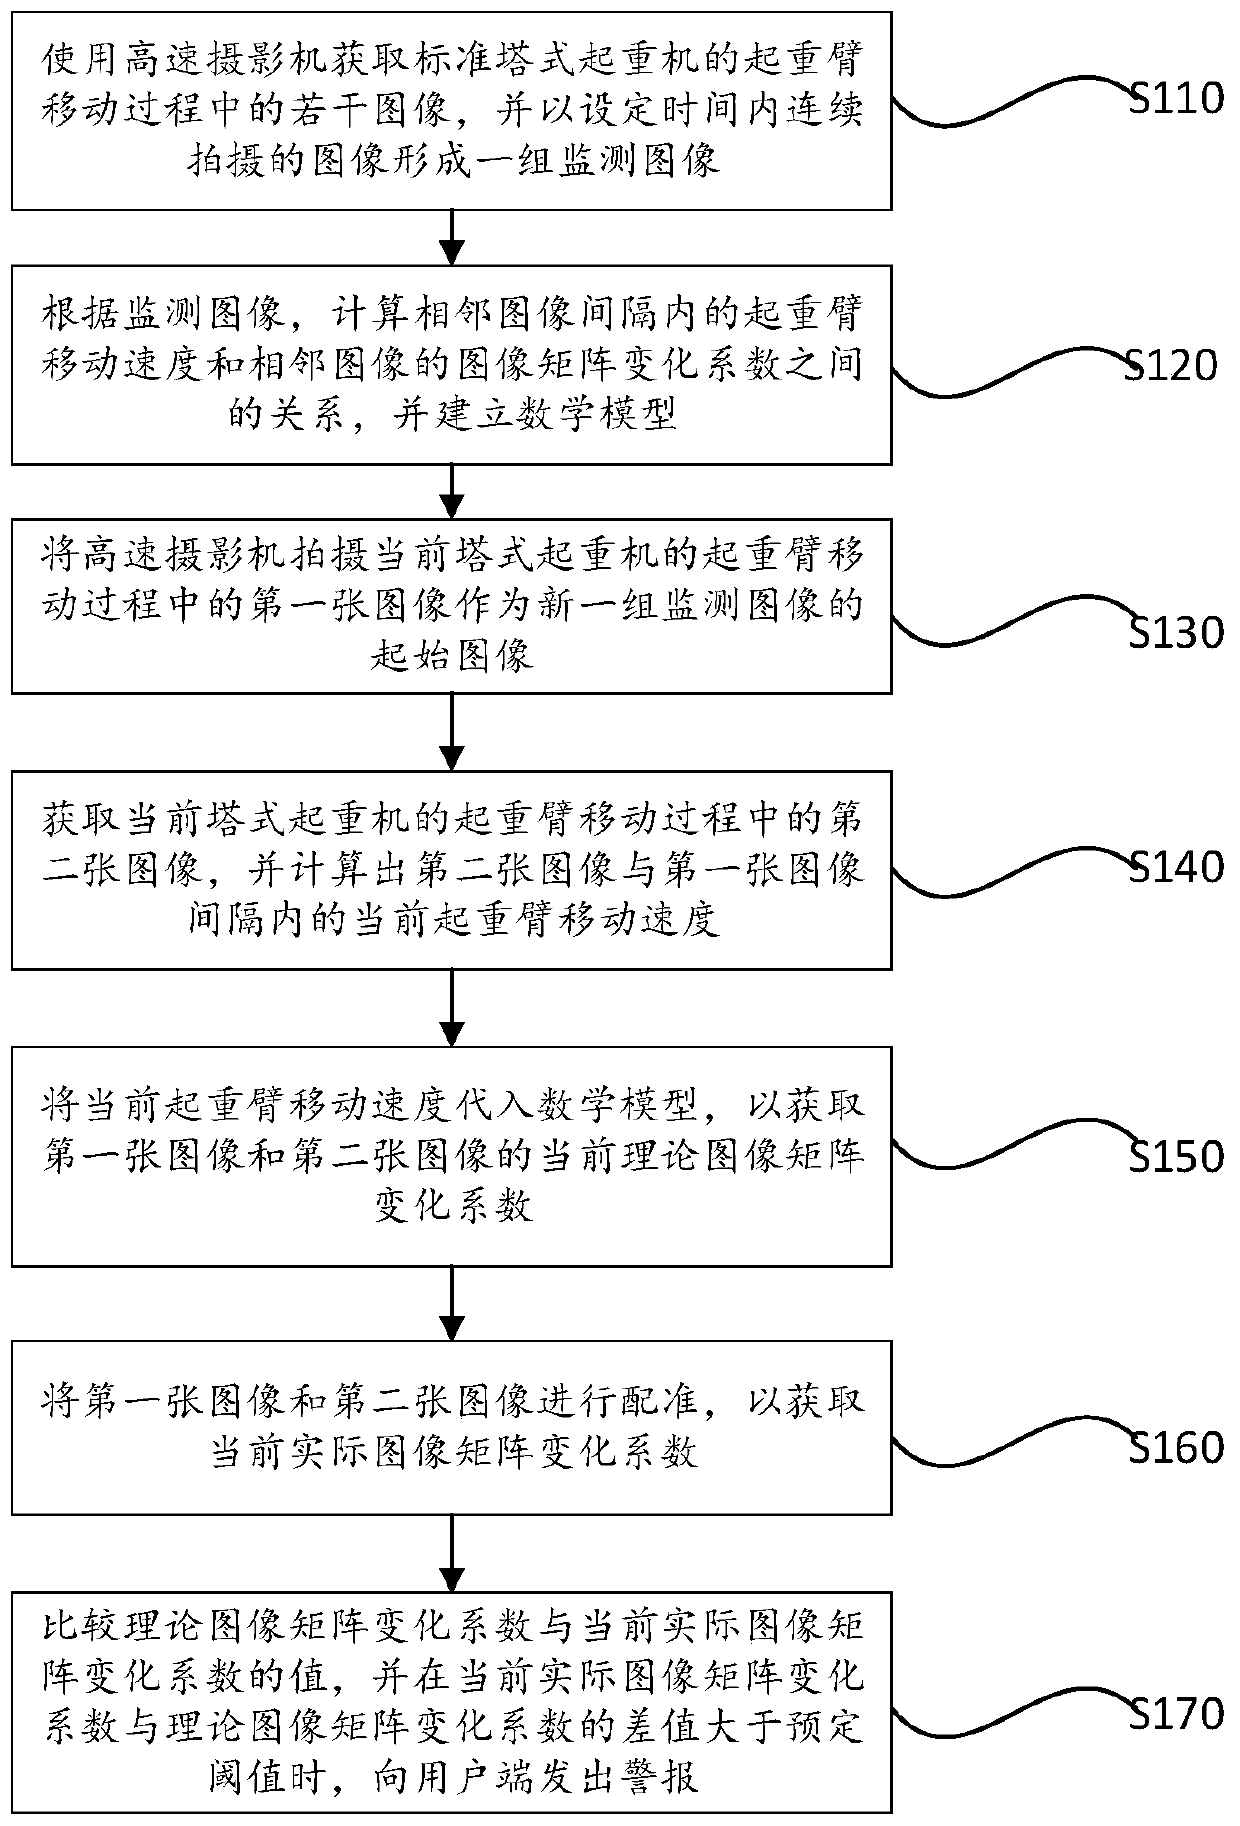 Method for monitoring tower crane by utilizing high-speed photogrammetric technology